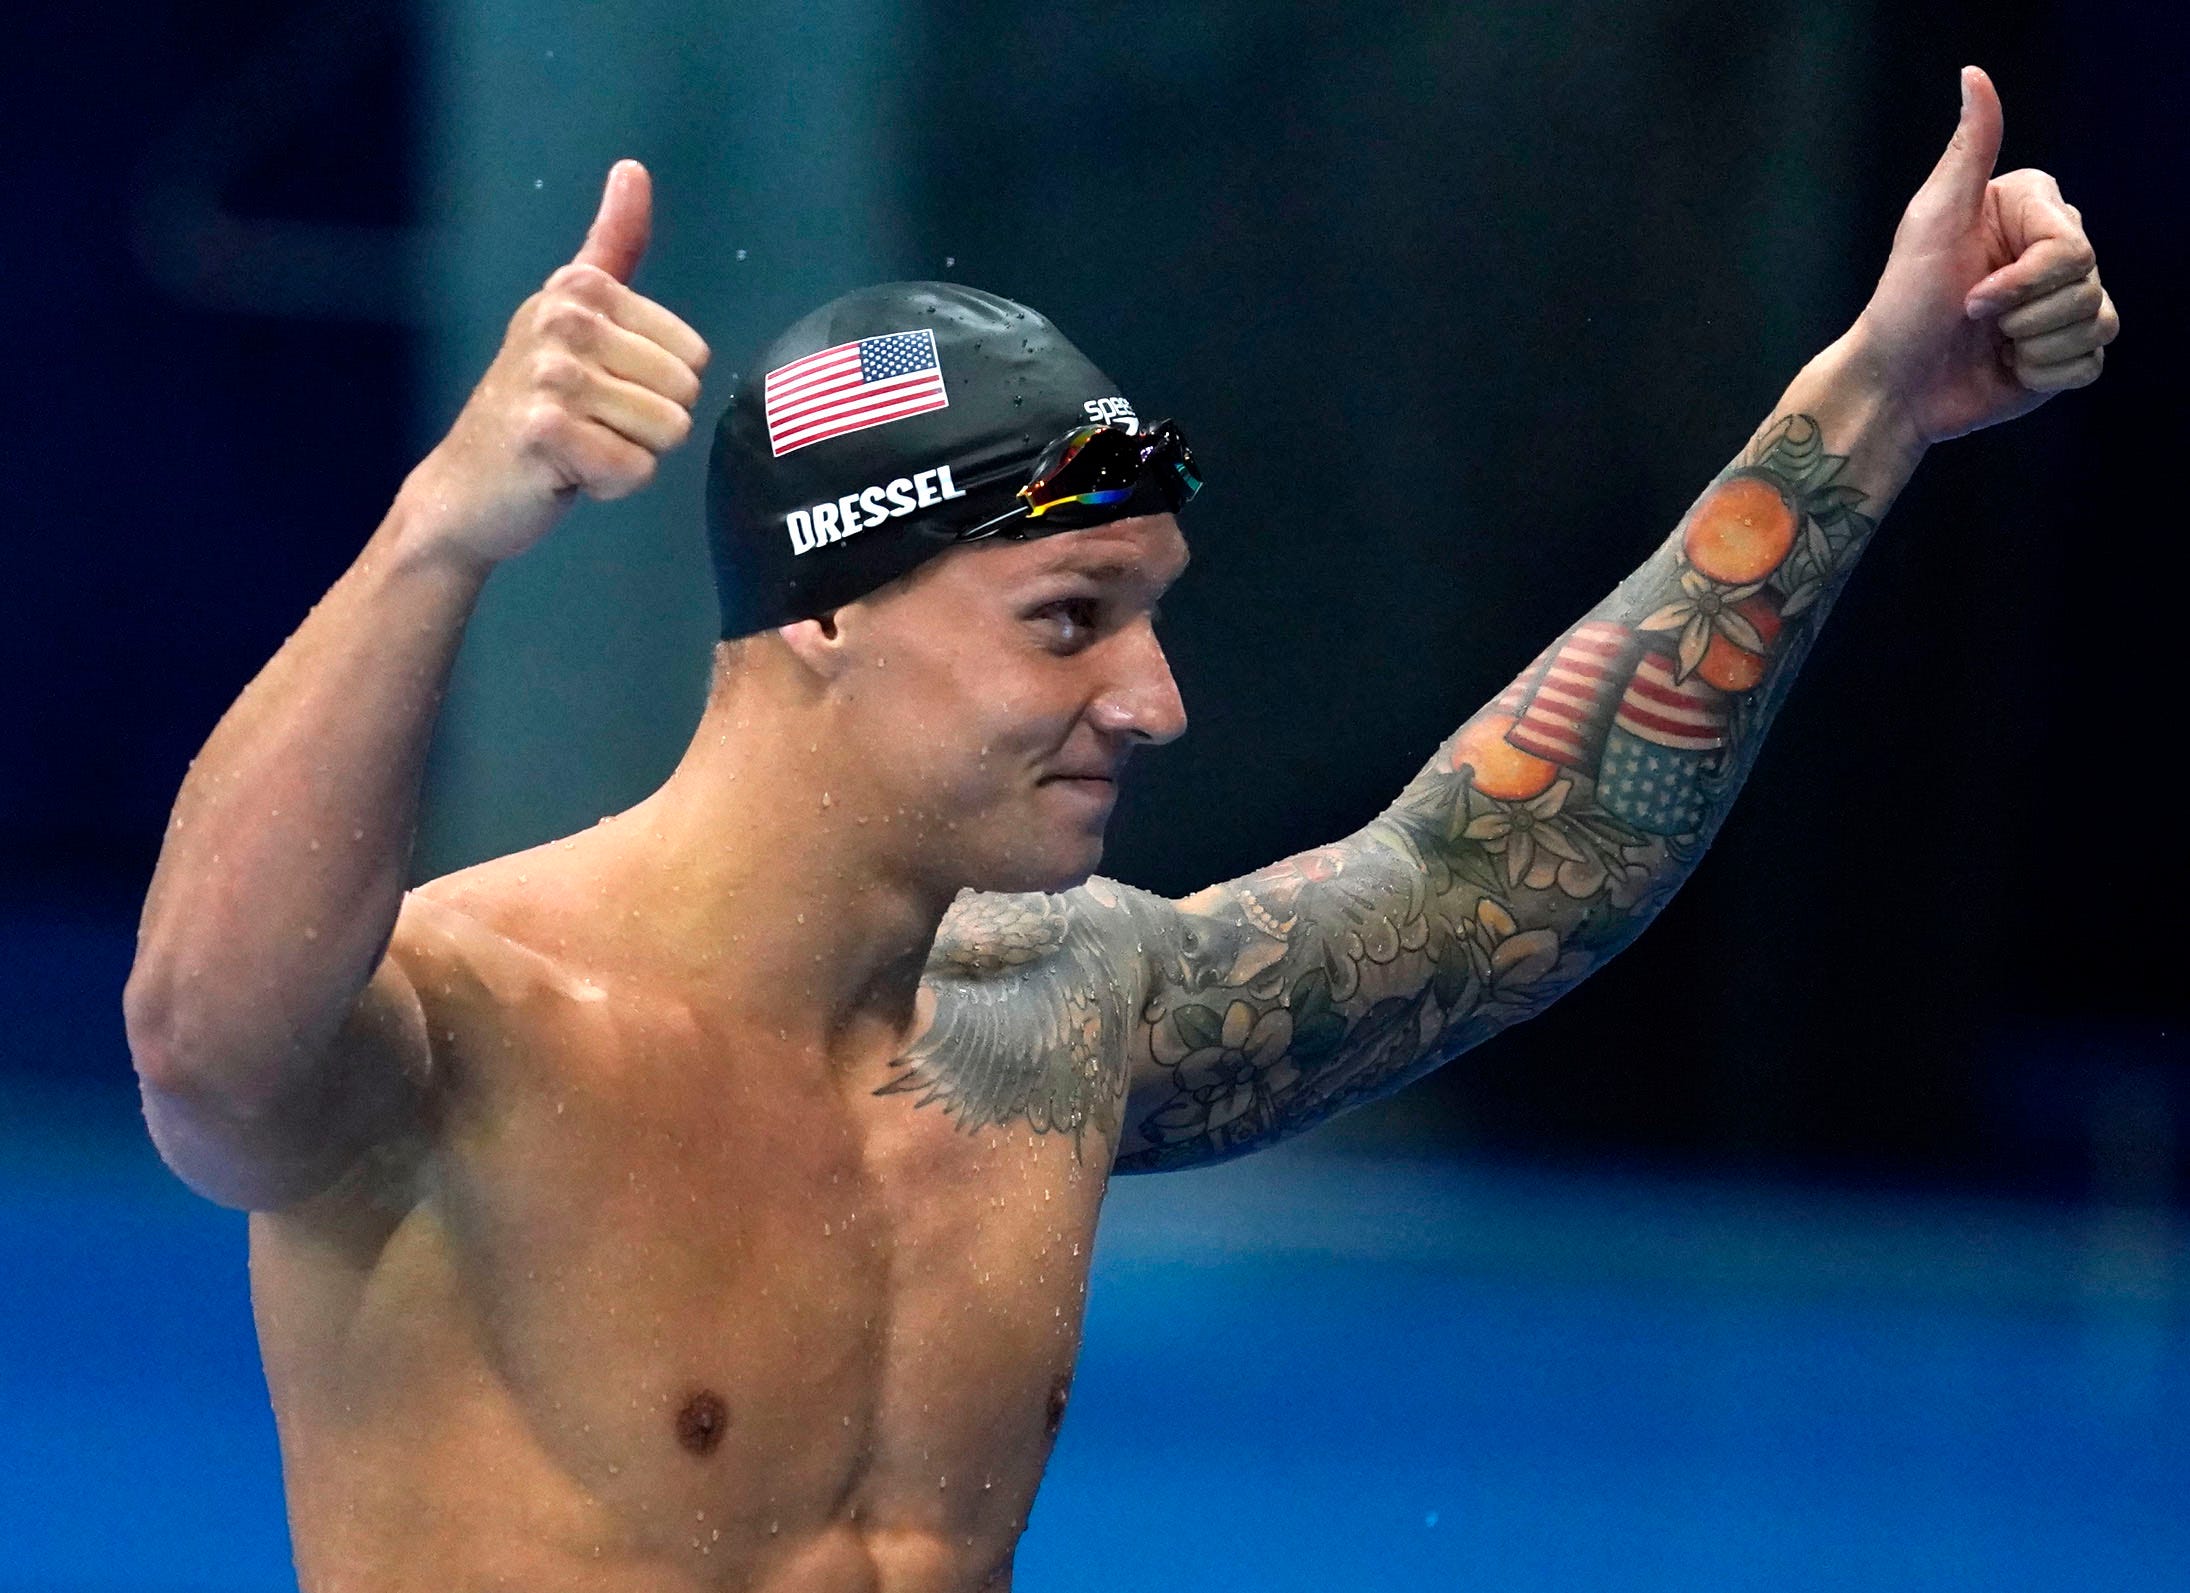 July 31, 2021: Caeleb Dressel (USA) reacts after winning the men's 100m butterfly final during the Tokyo 2020 Olympic Summer Games at Tokyo Aquatics Centre.